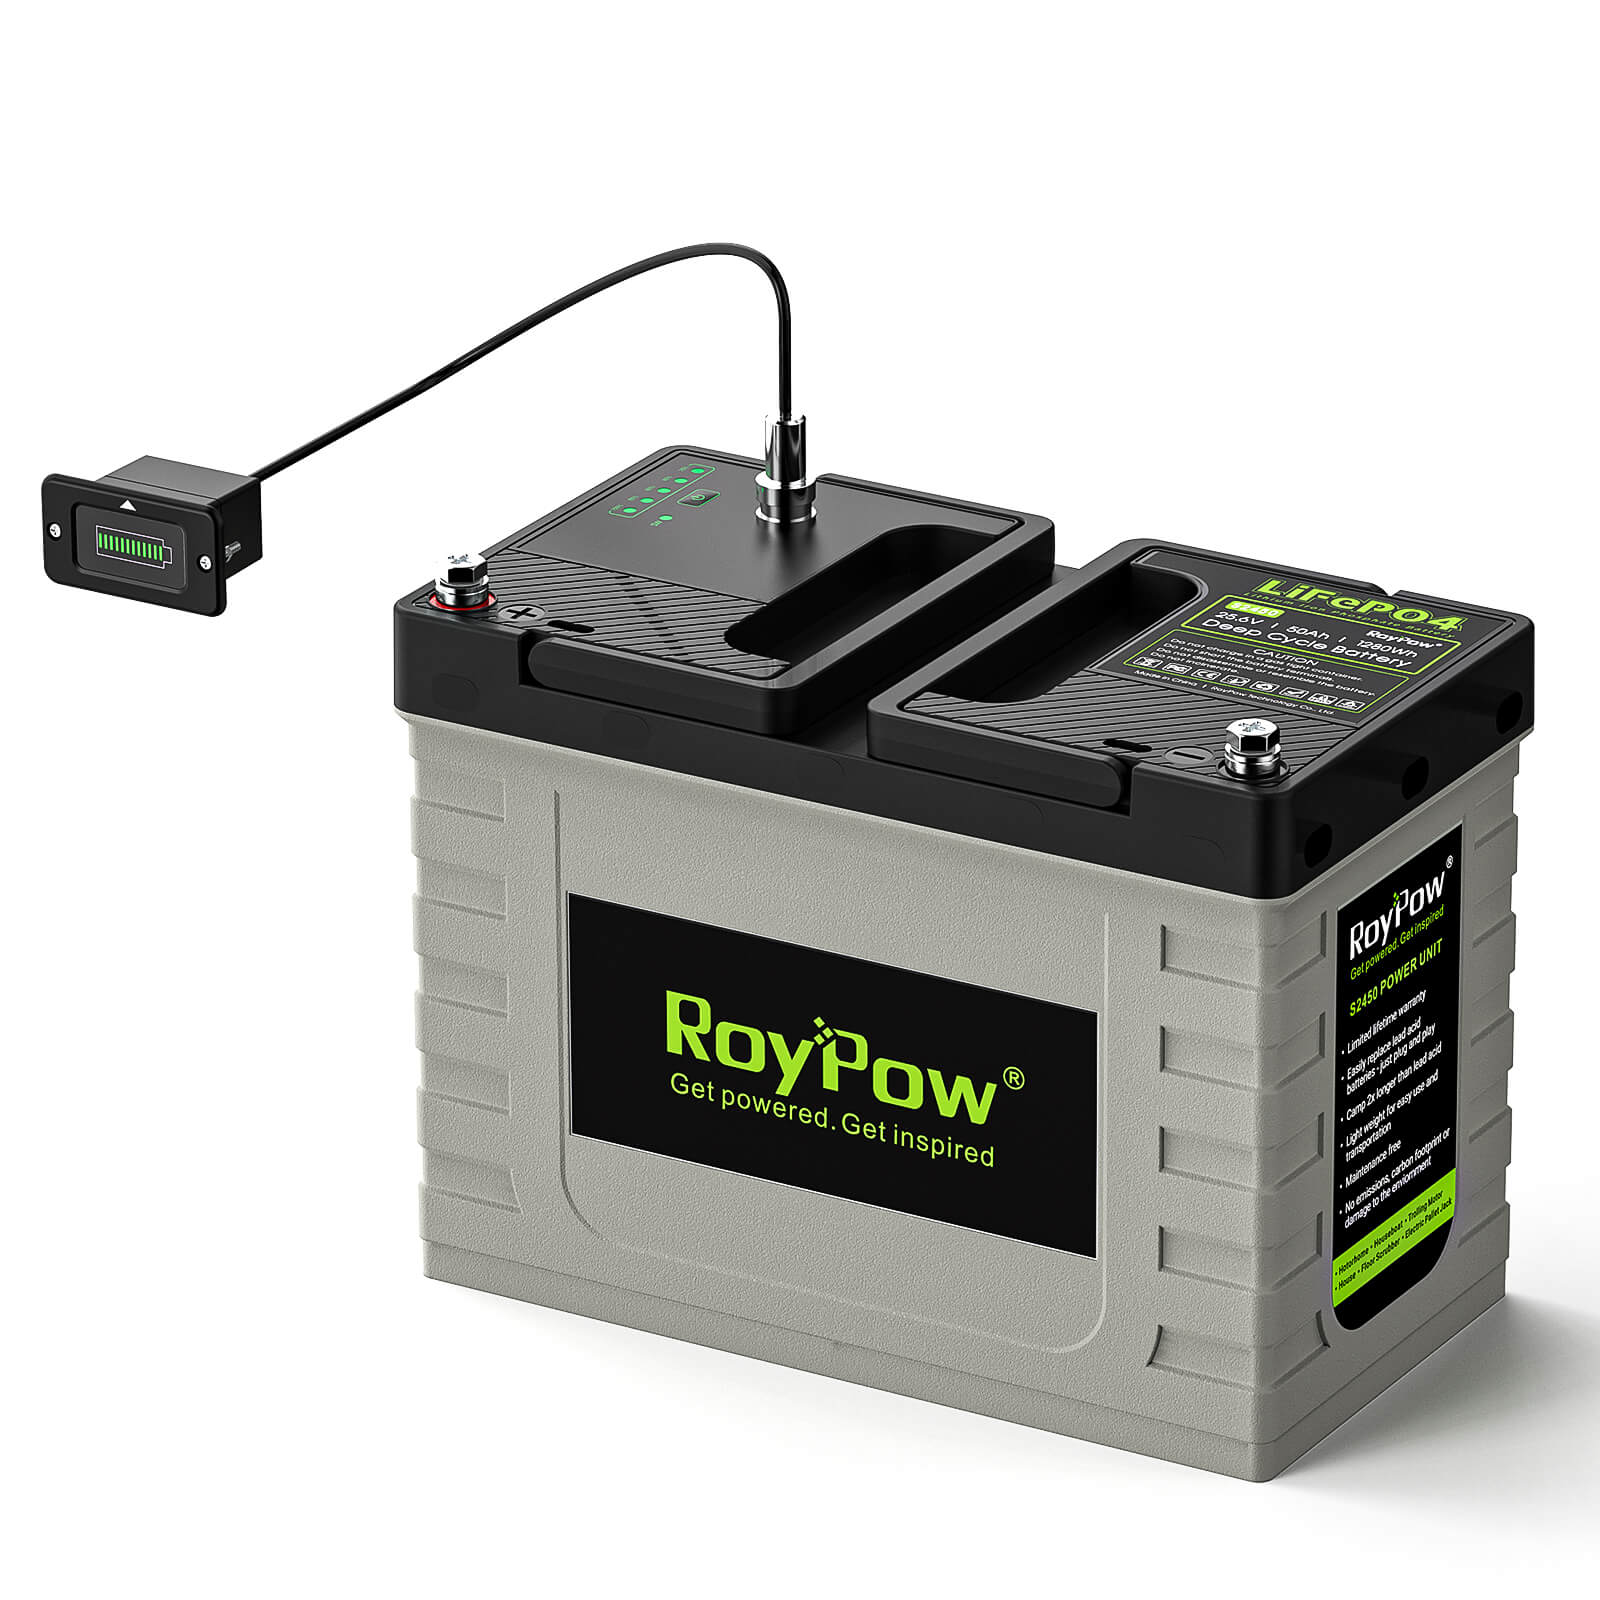  KEPWORTH 12V 400Ah LiFePO4 Battery Deep Cycle Lithium Iron  Phosphate Battery Built-in BMS Lightweight Maintenance-Free Perfect for  RV/Camping, Solar/Backup Power,Trolling,Motor/5-Years Warranty : Automotive